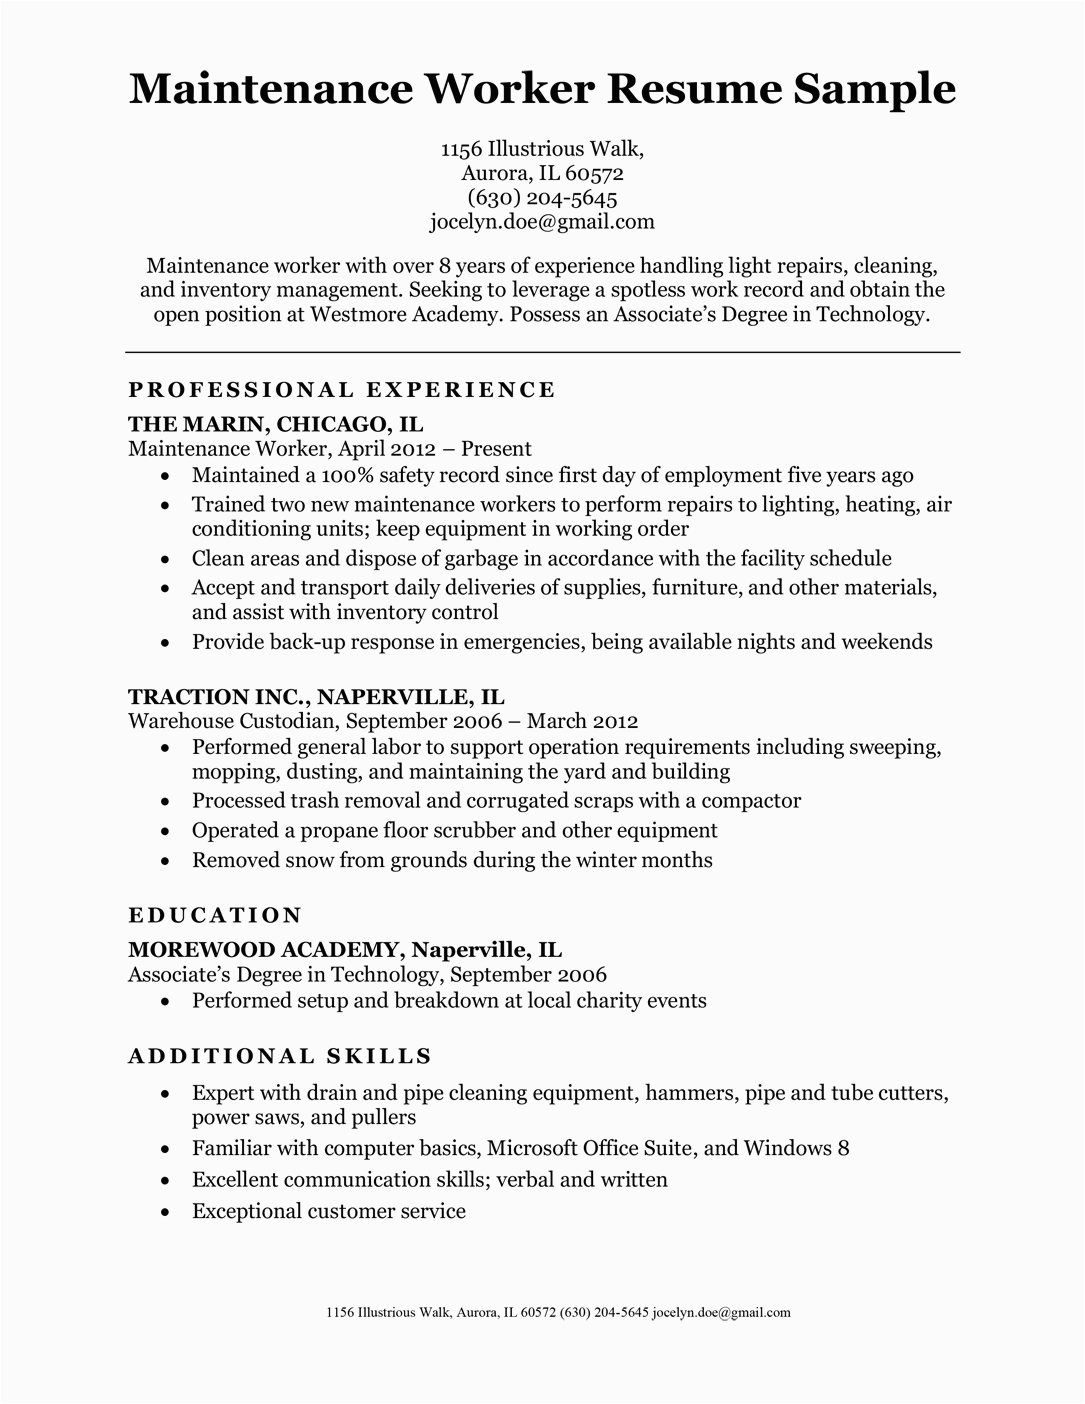 Sample Resume for Factory Worker with No Experience Resume for Warehouse Job with No Experience